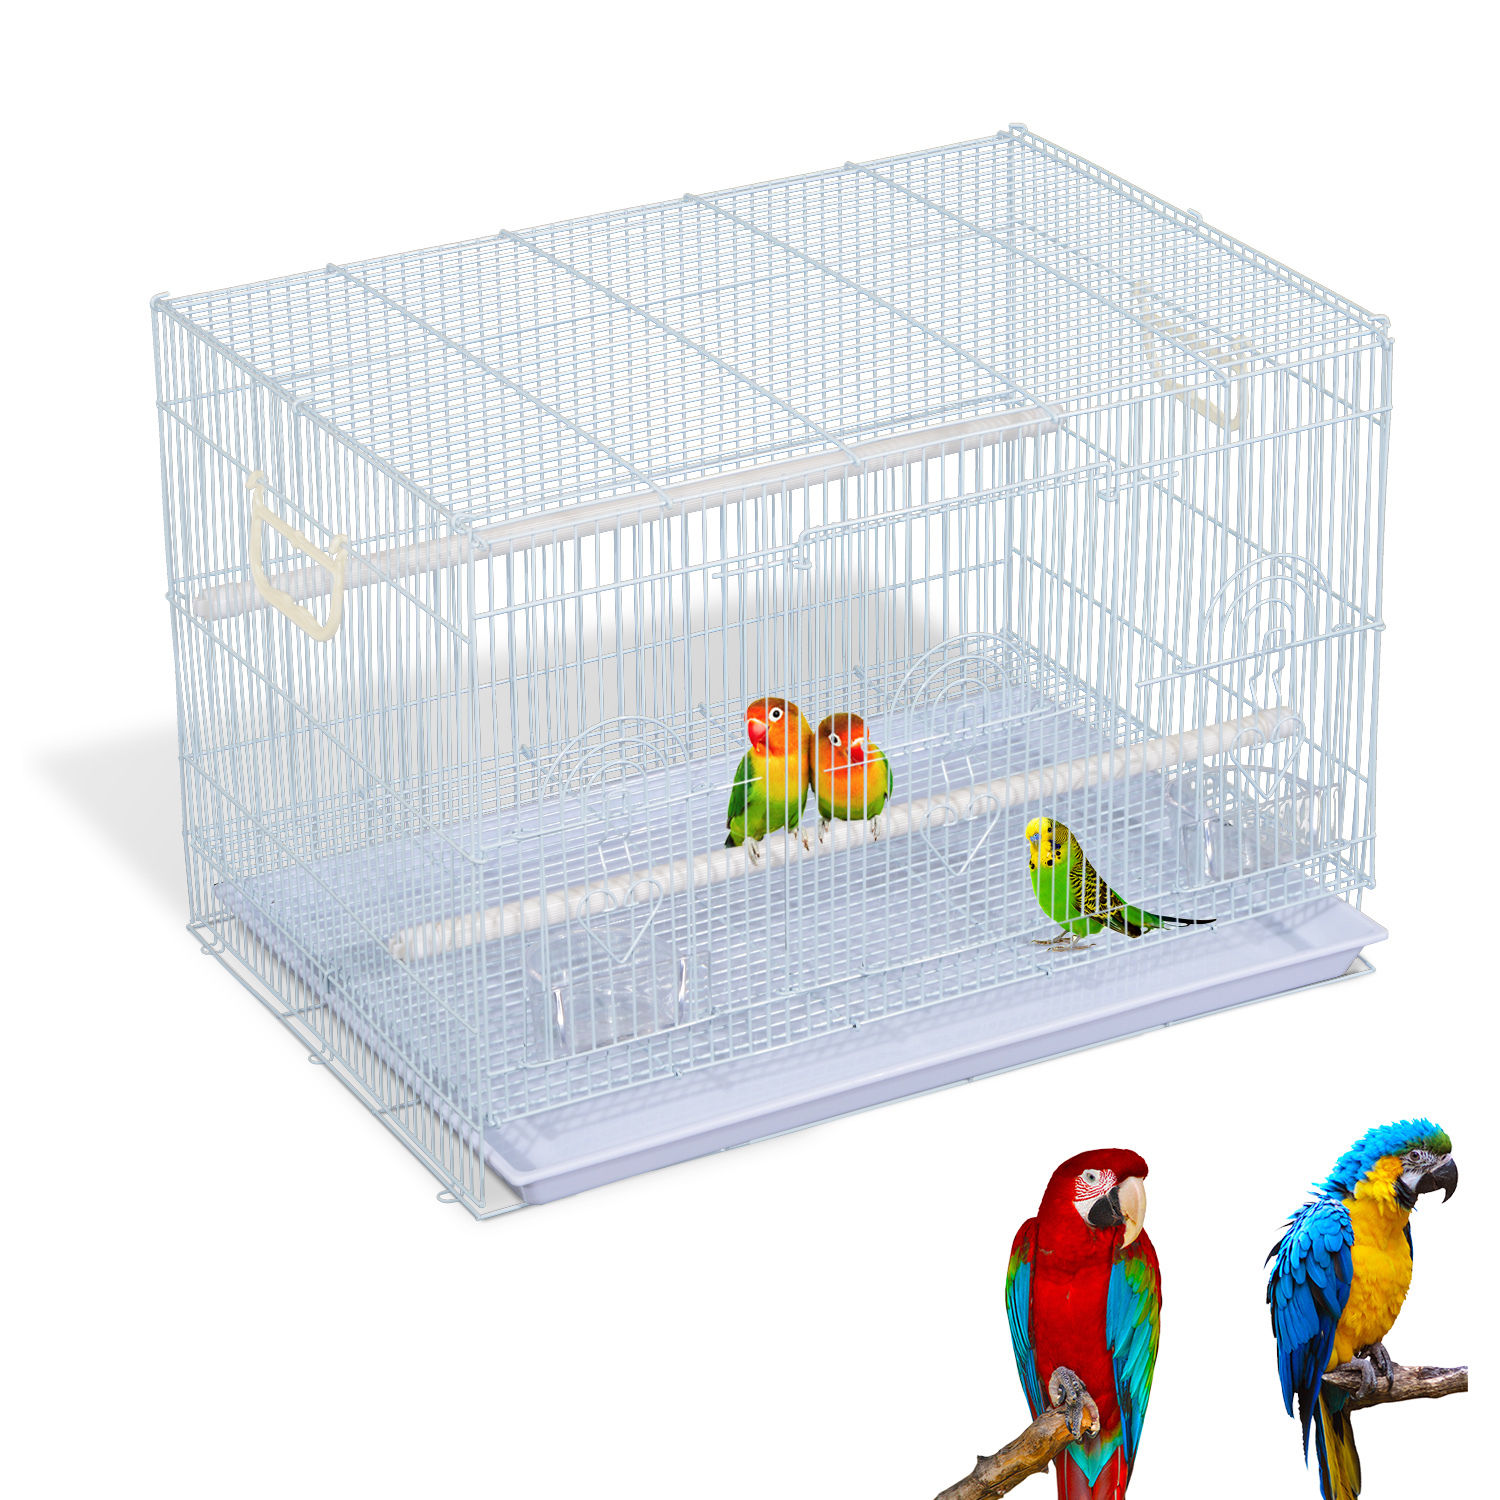 30" Travel Bird Cage Macaw Parrot Finch Cockatiel Pet Supply Feeder House Play PawHut D51-026